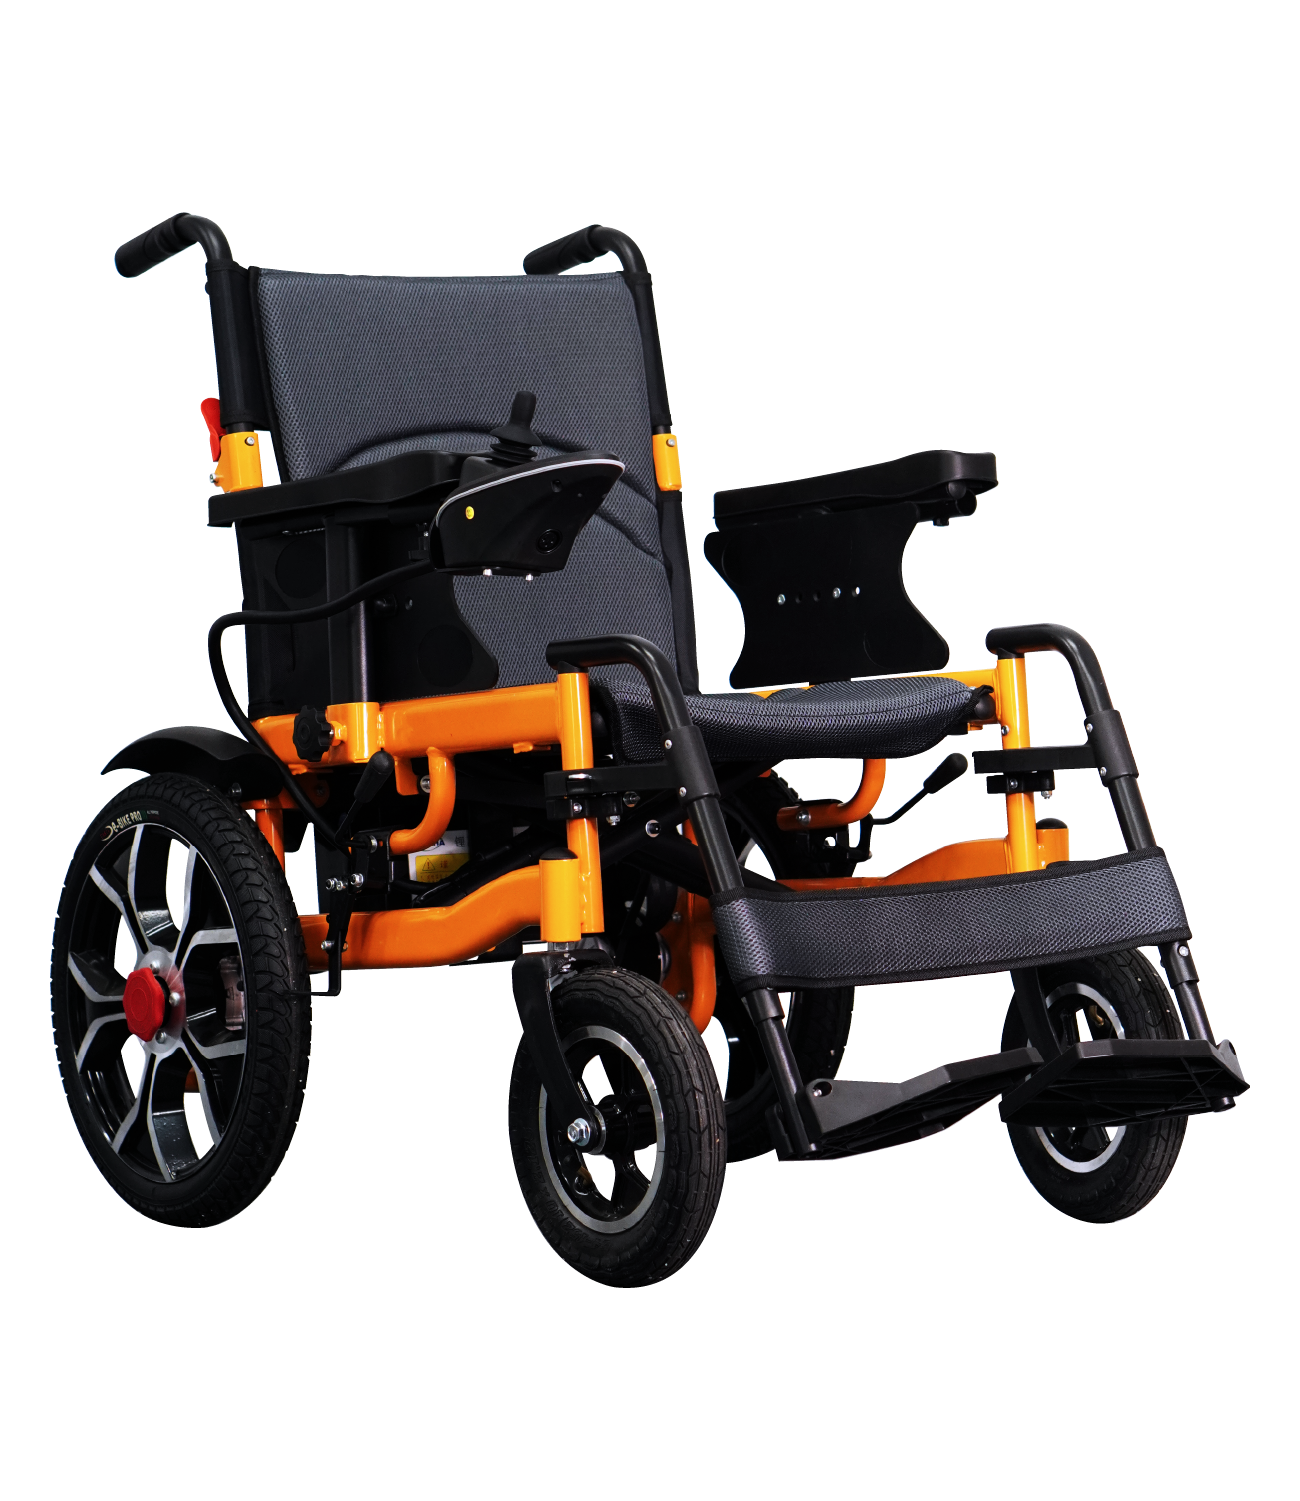 Buyer’s Guide to Electric Wheelchair in Malaysia (2021 Edition)